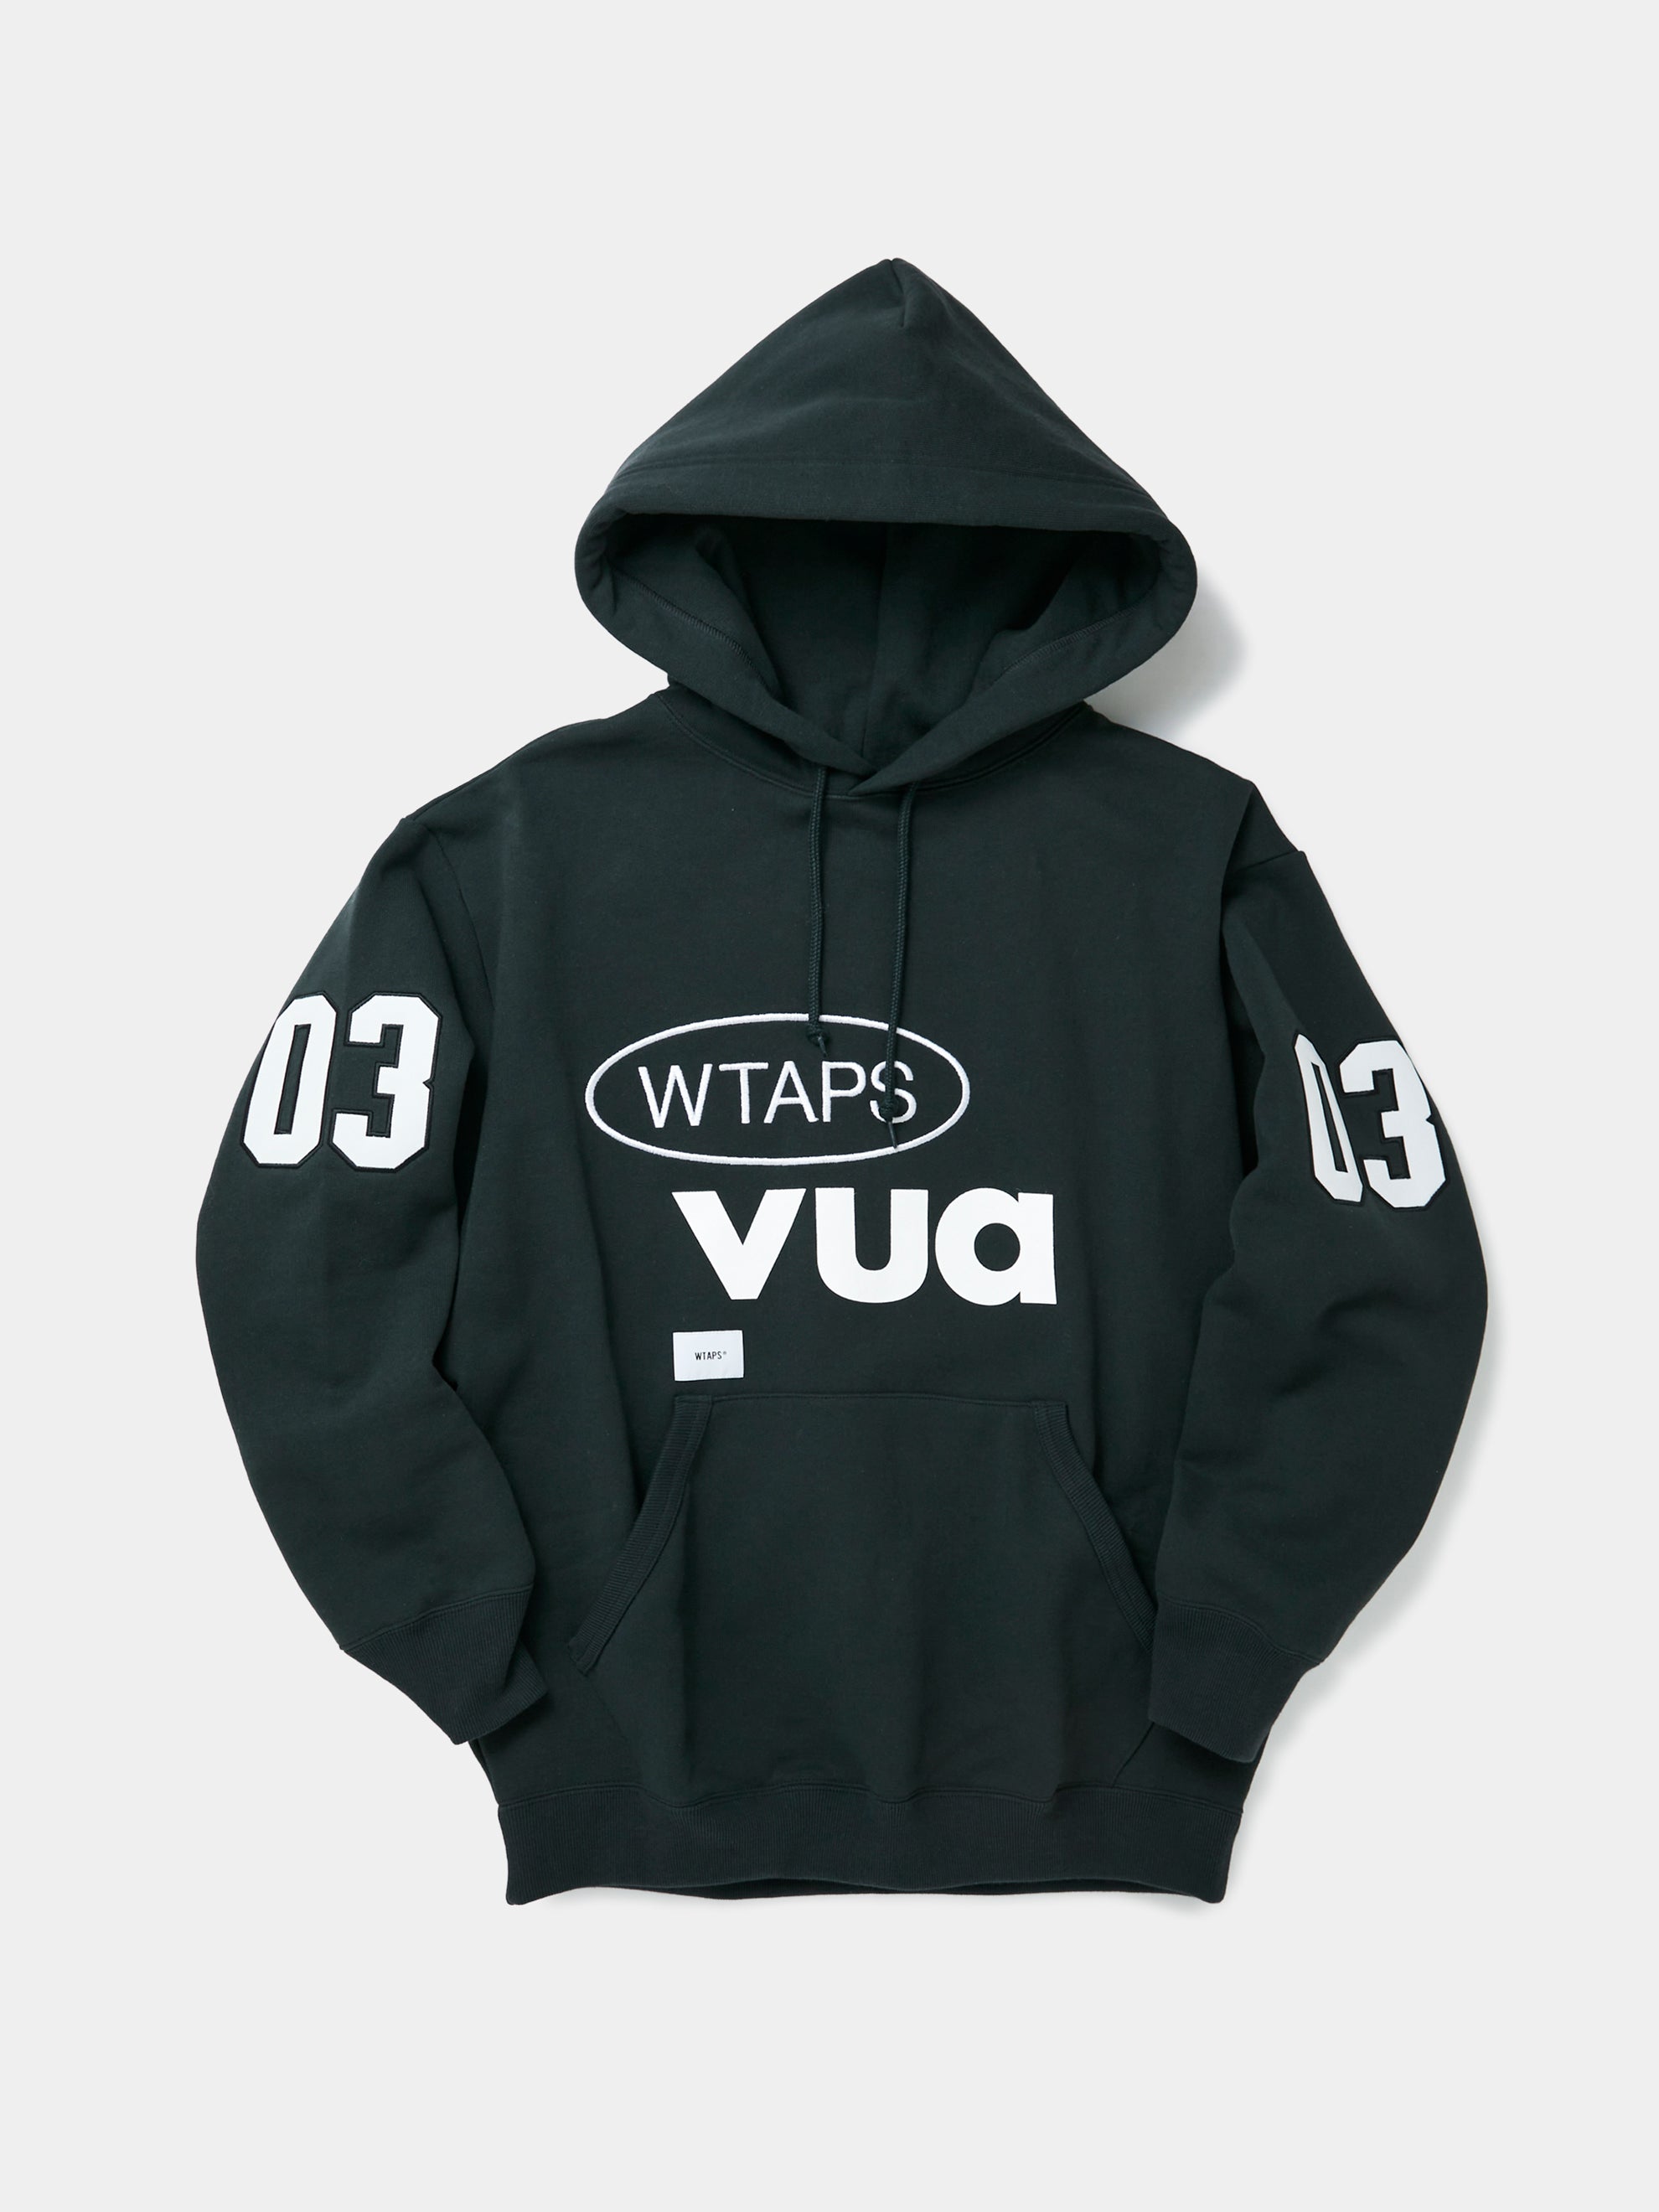 Buy Wtaps OBJ 02 / HOODY / COTTON. PROTECT (Black) Online at